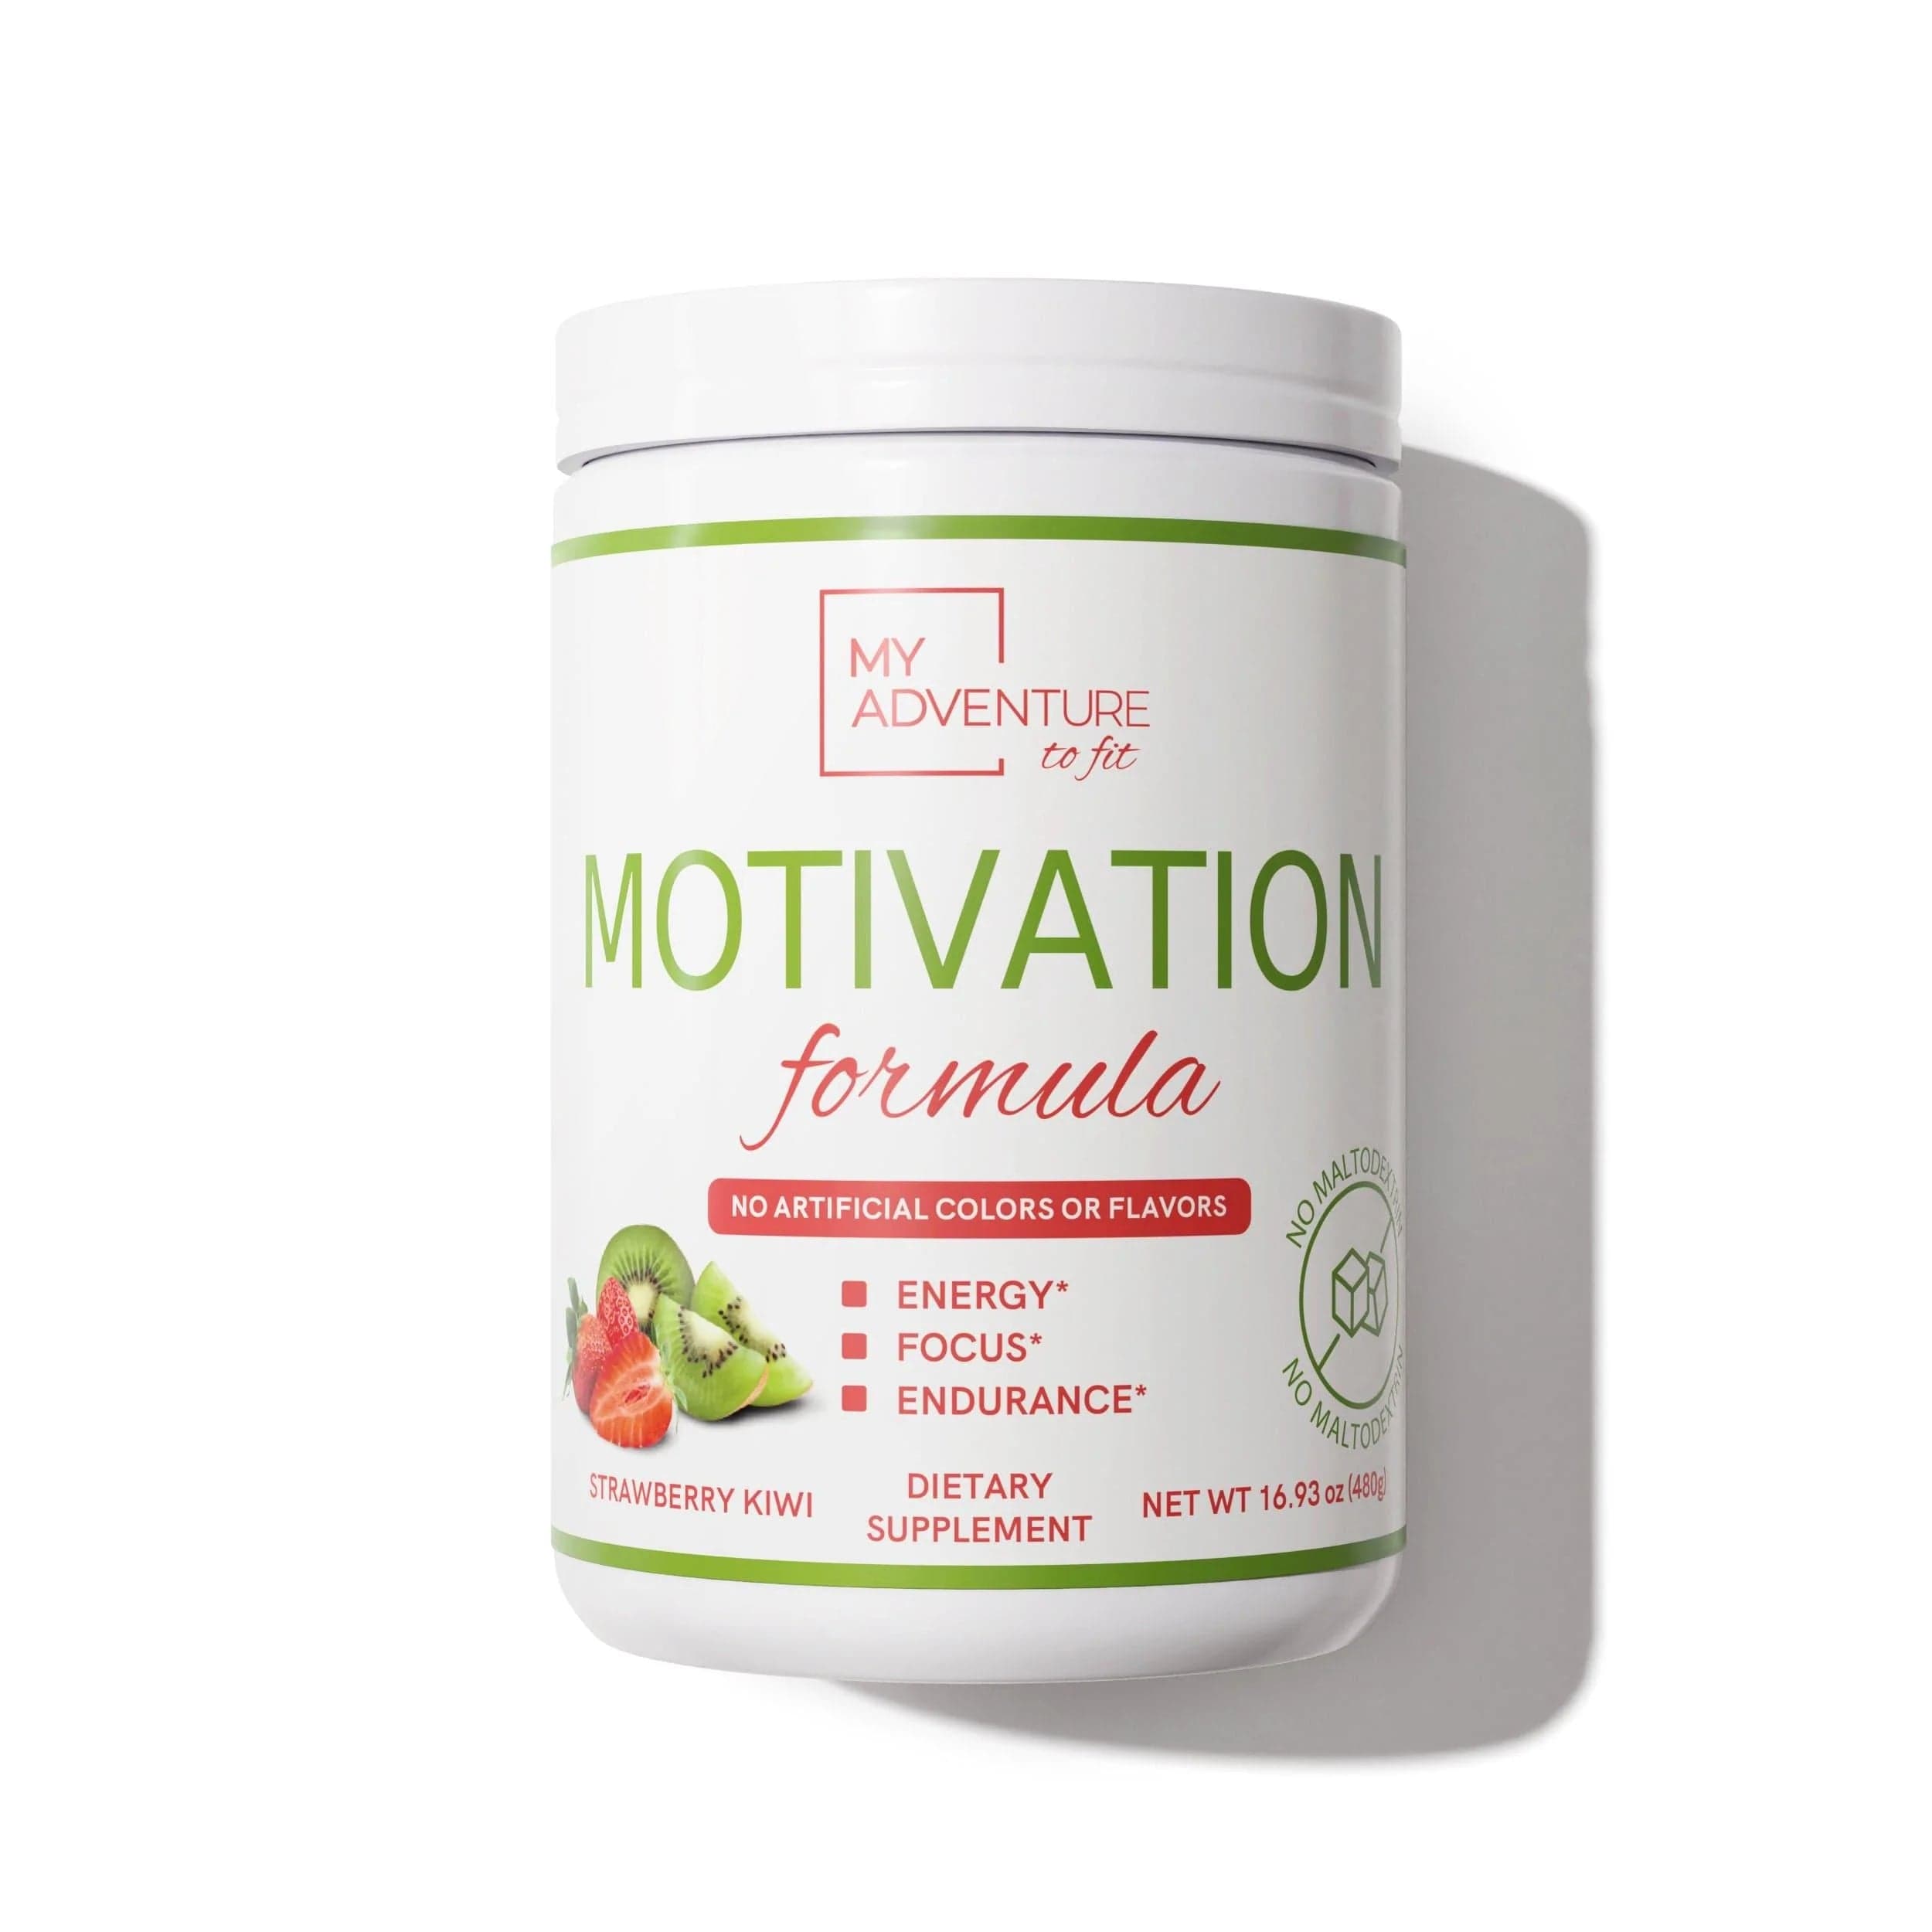 Pre-Workout - Strawberry Kiwi - My Adventure to Fit